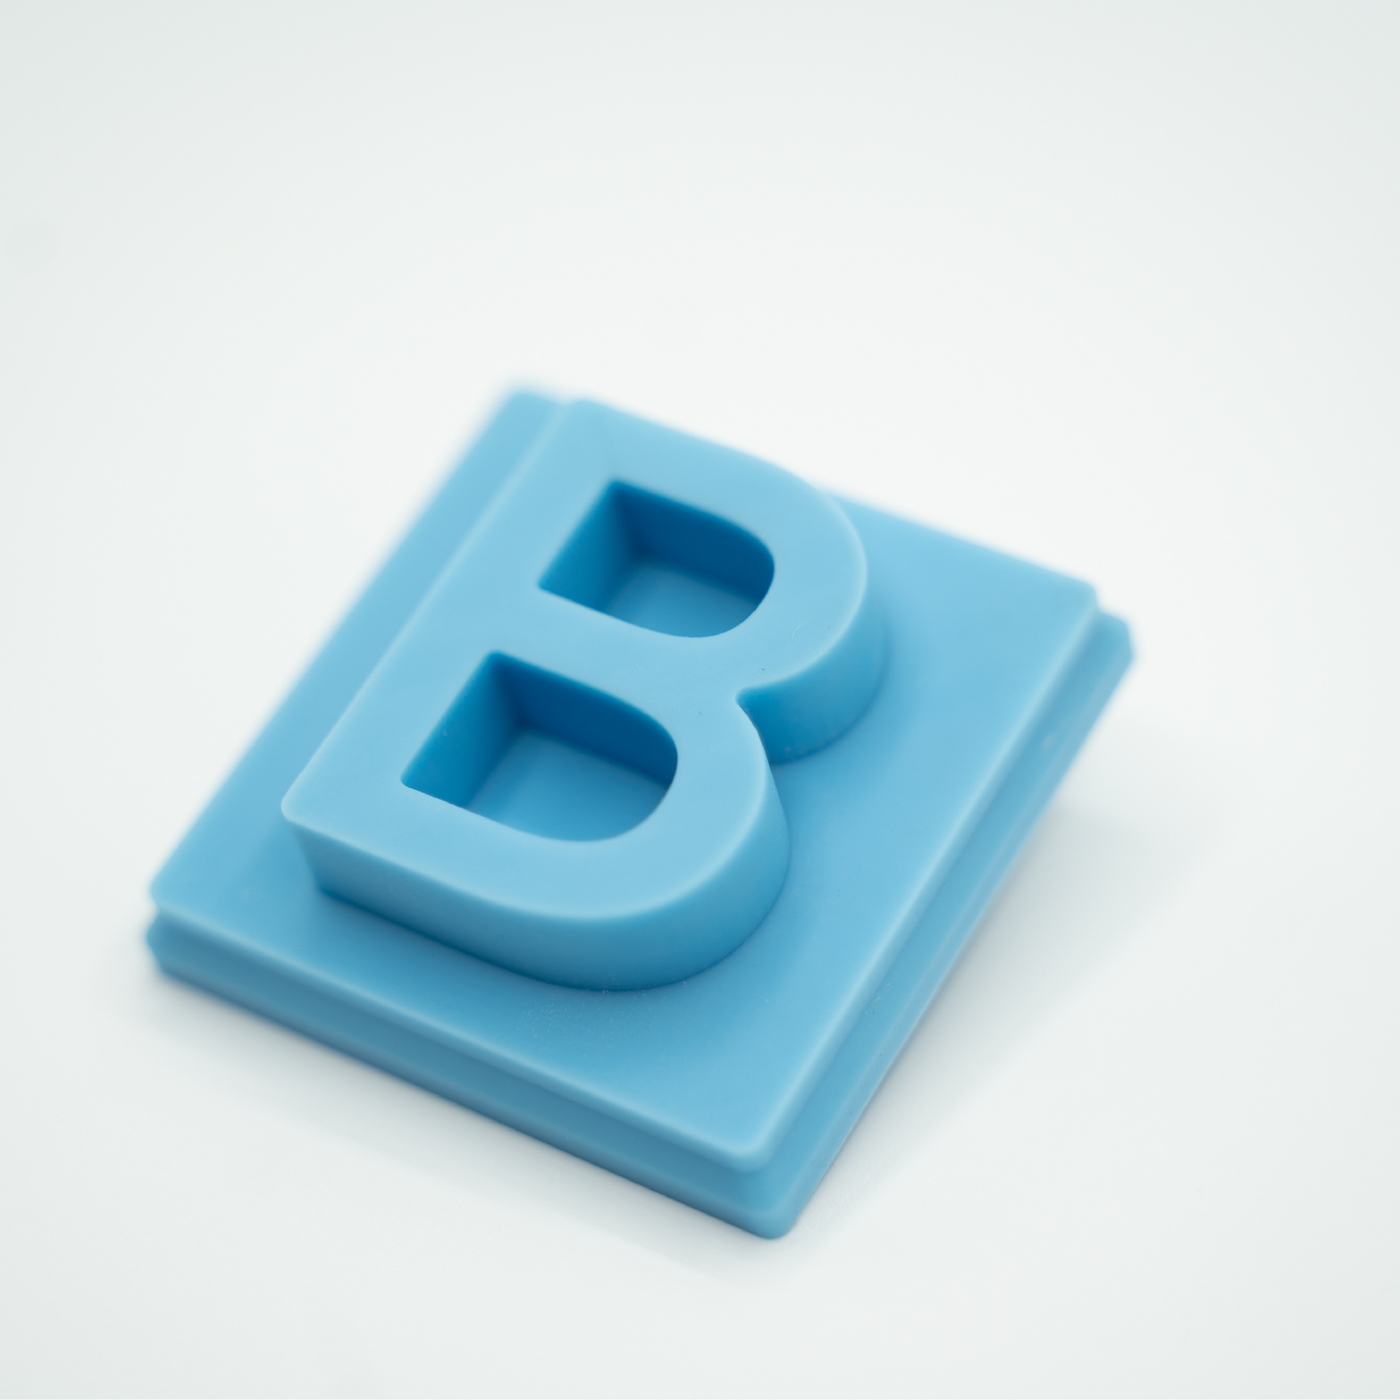 Letter B Inserts - 3 Pack